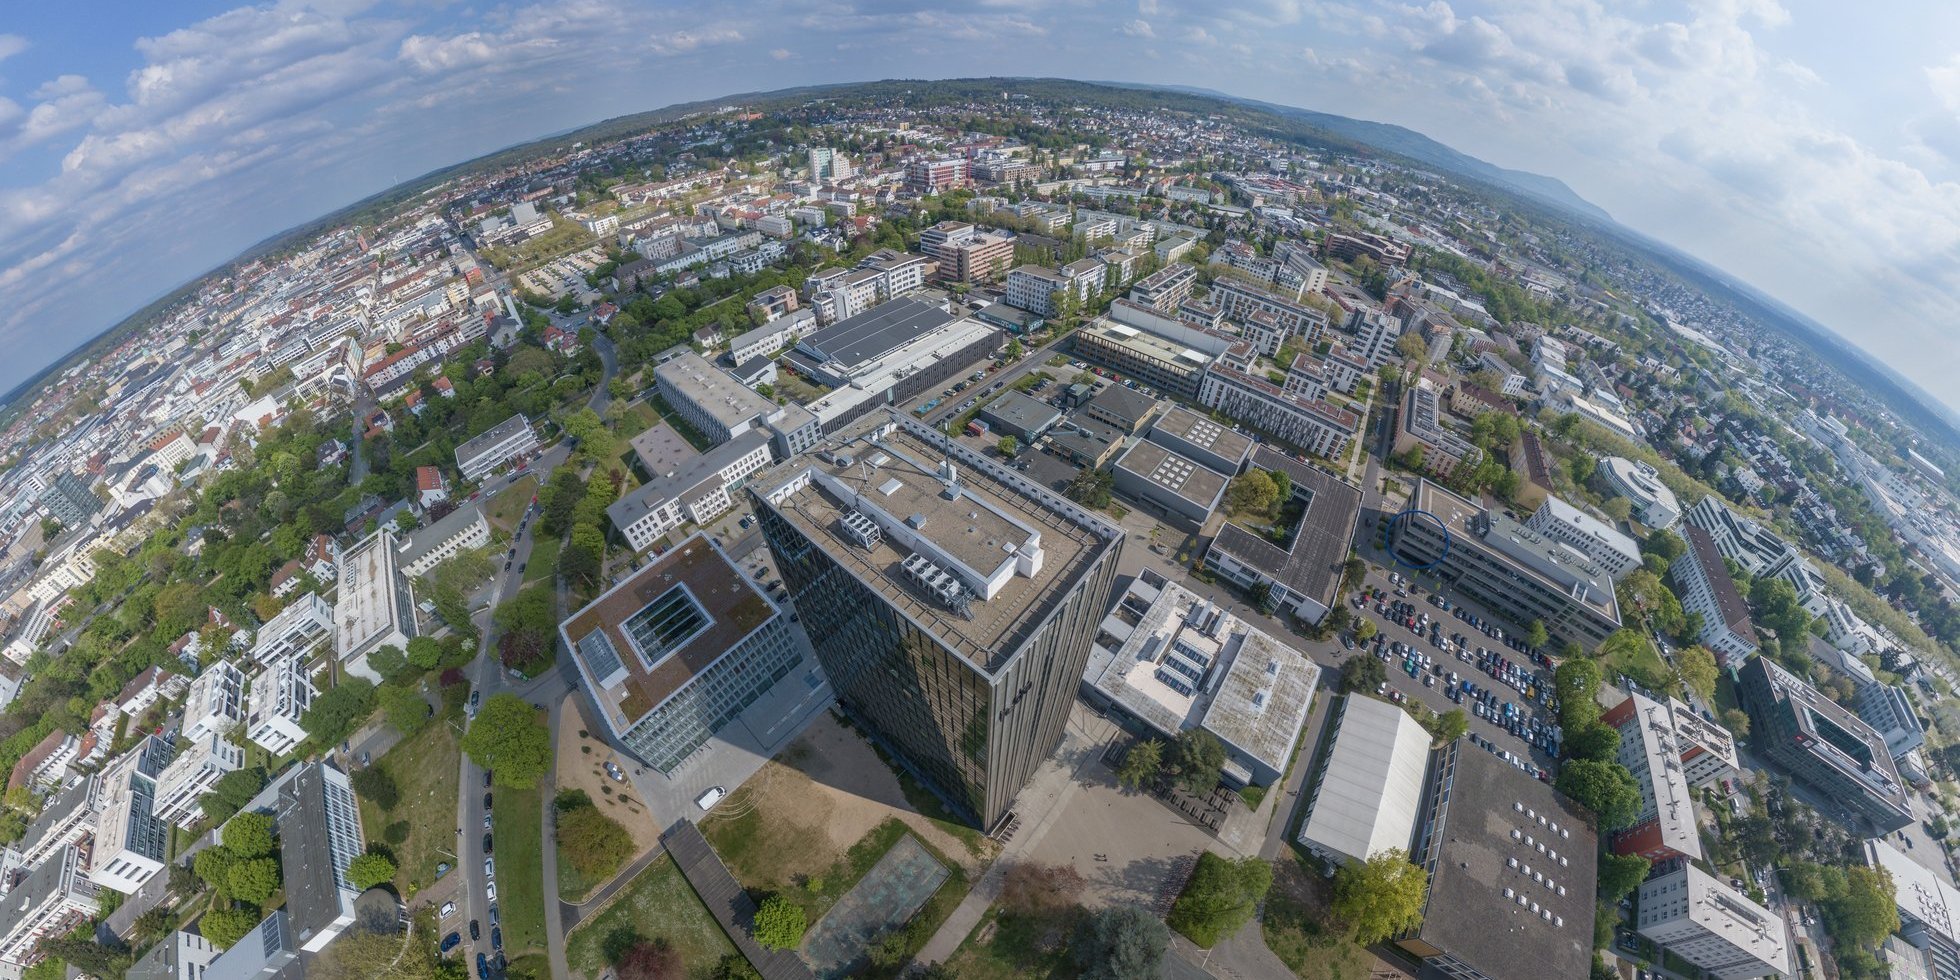 Drone view picture of Hochschule Darmstadt's main campus with the C10 high-rise building in the center